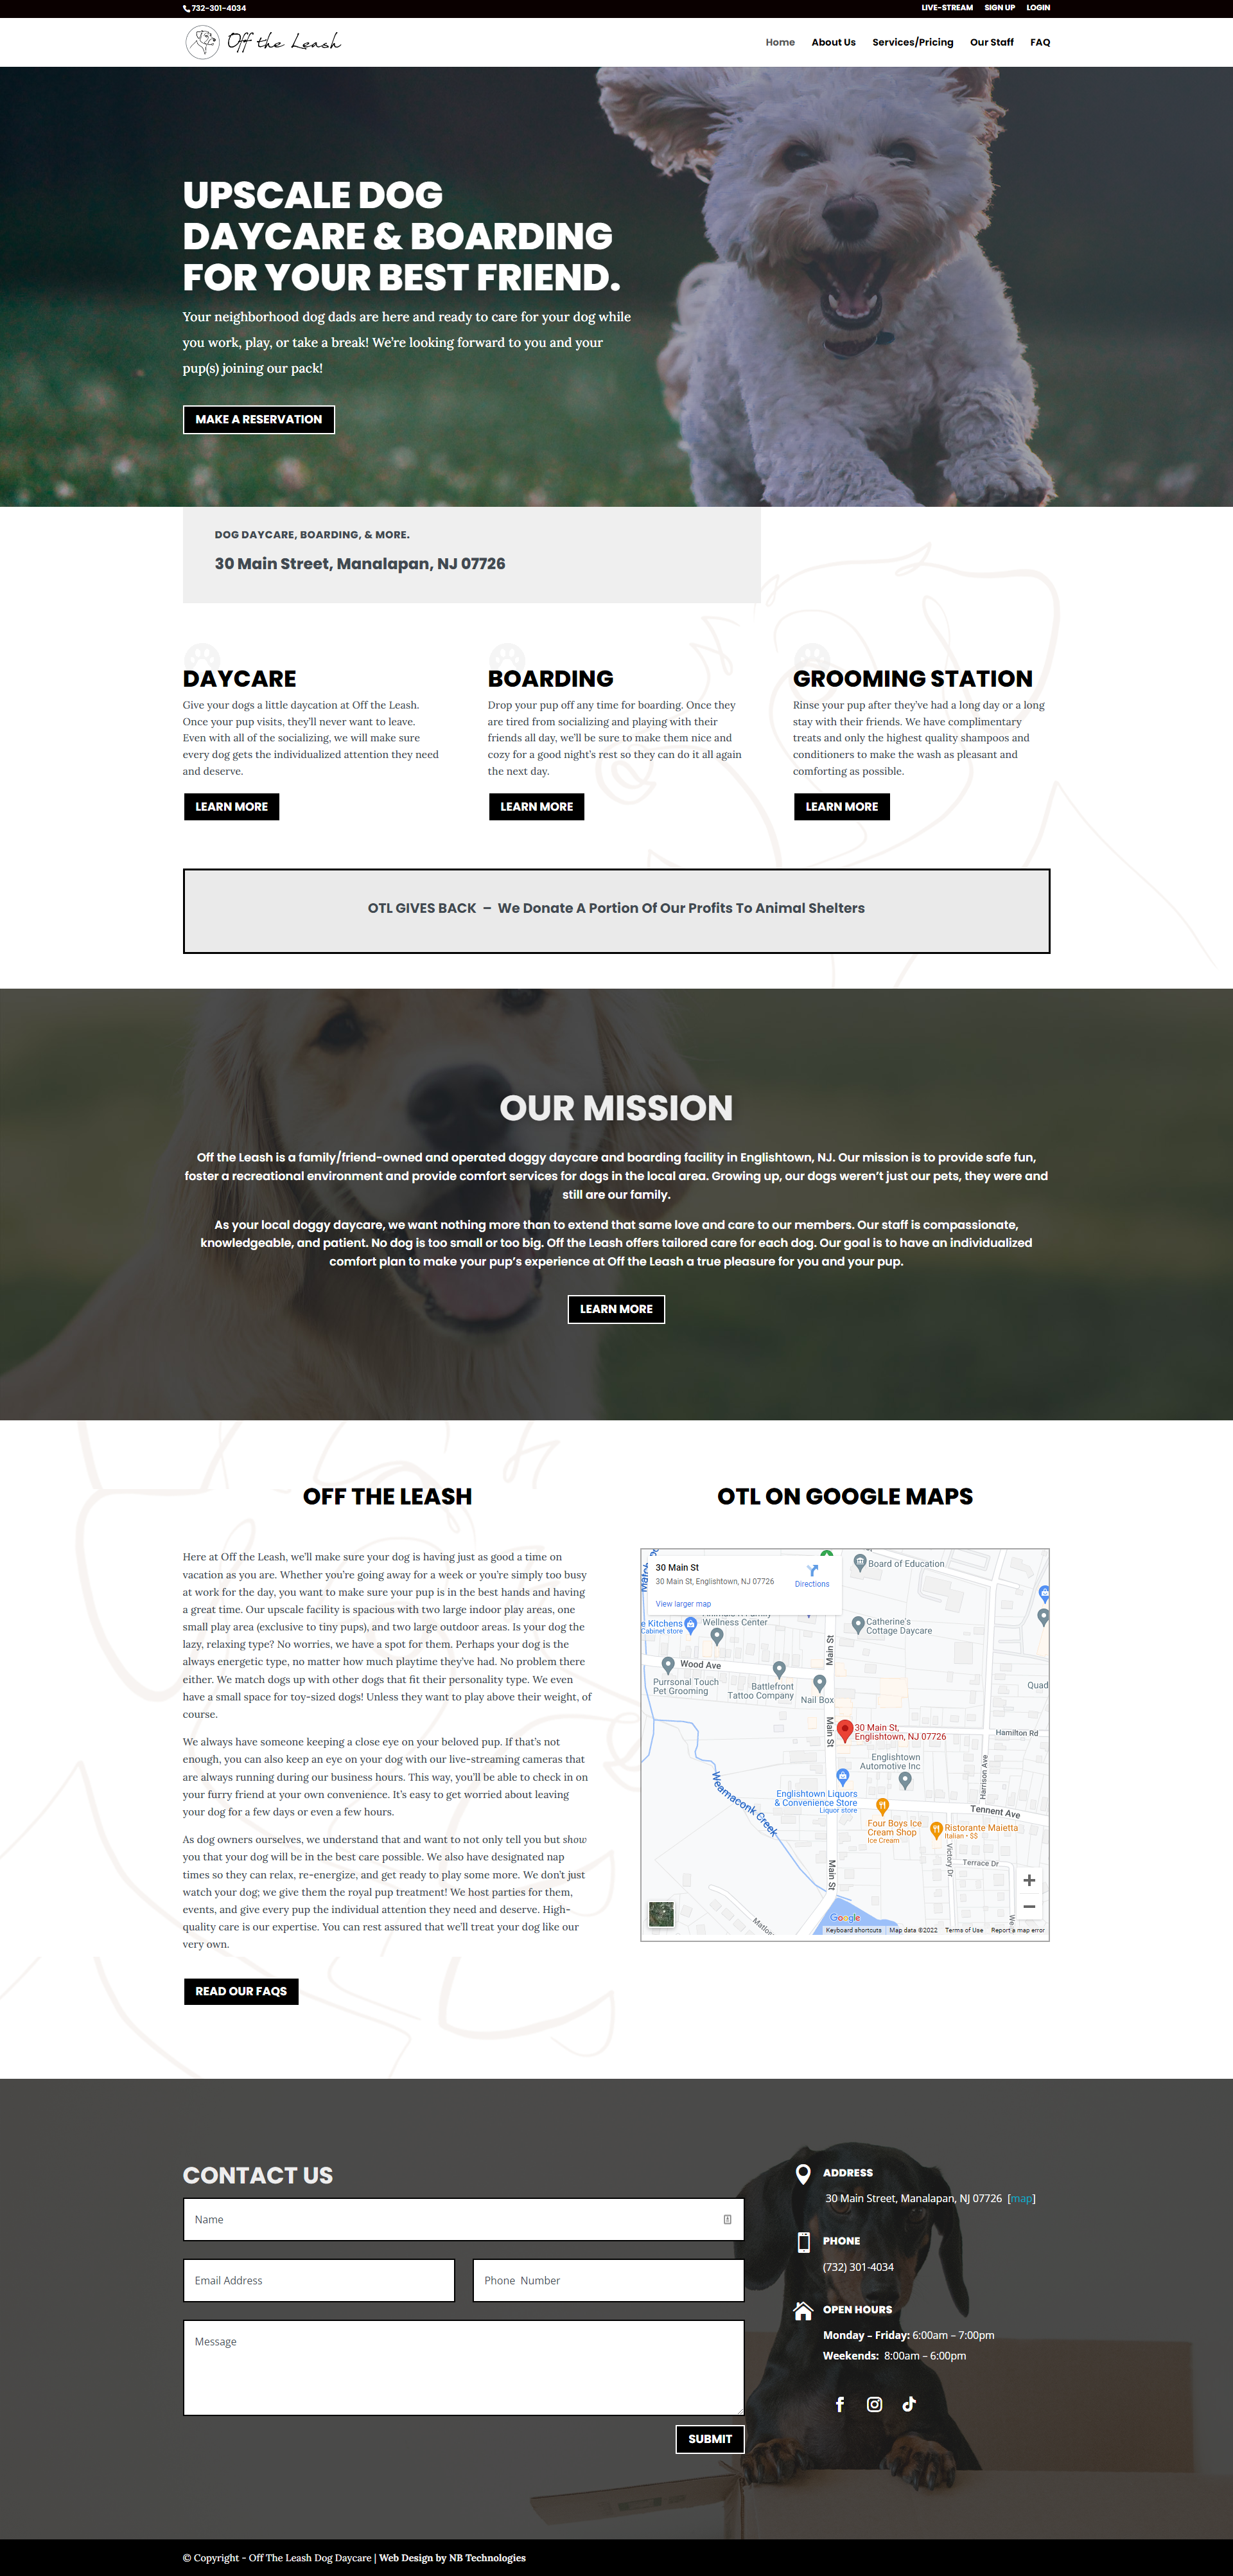 Off The Leash Homepage by NB Technologies